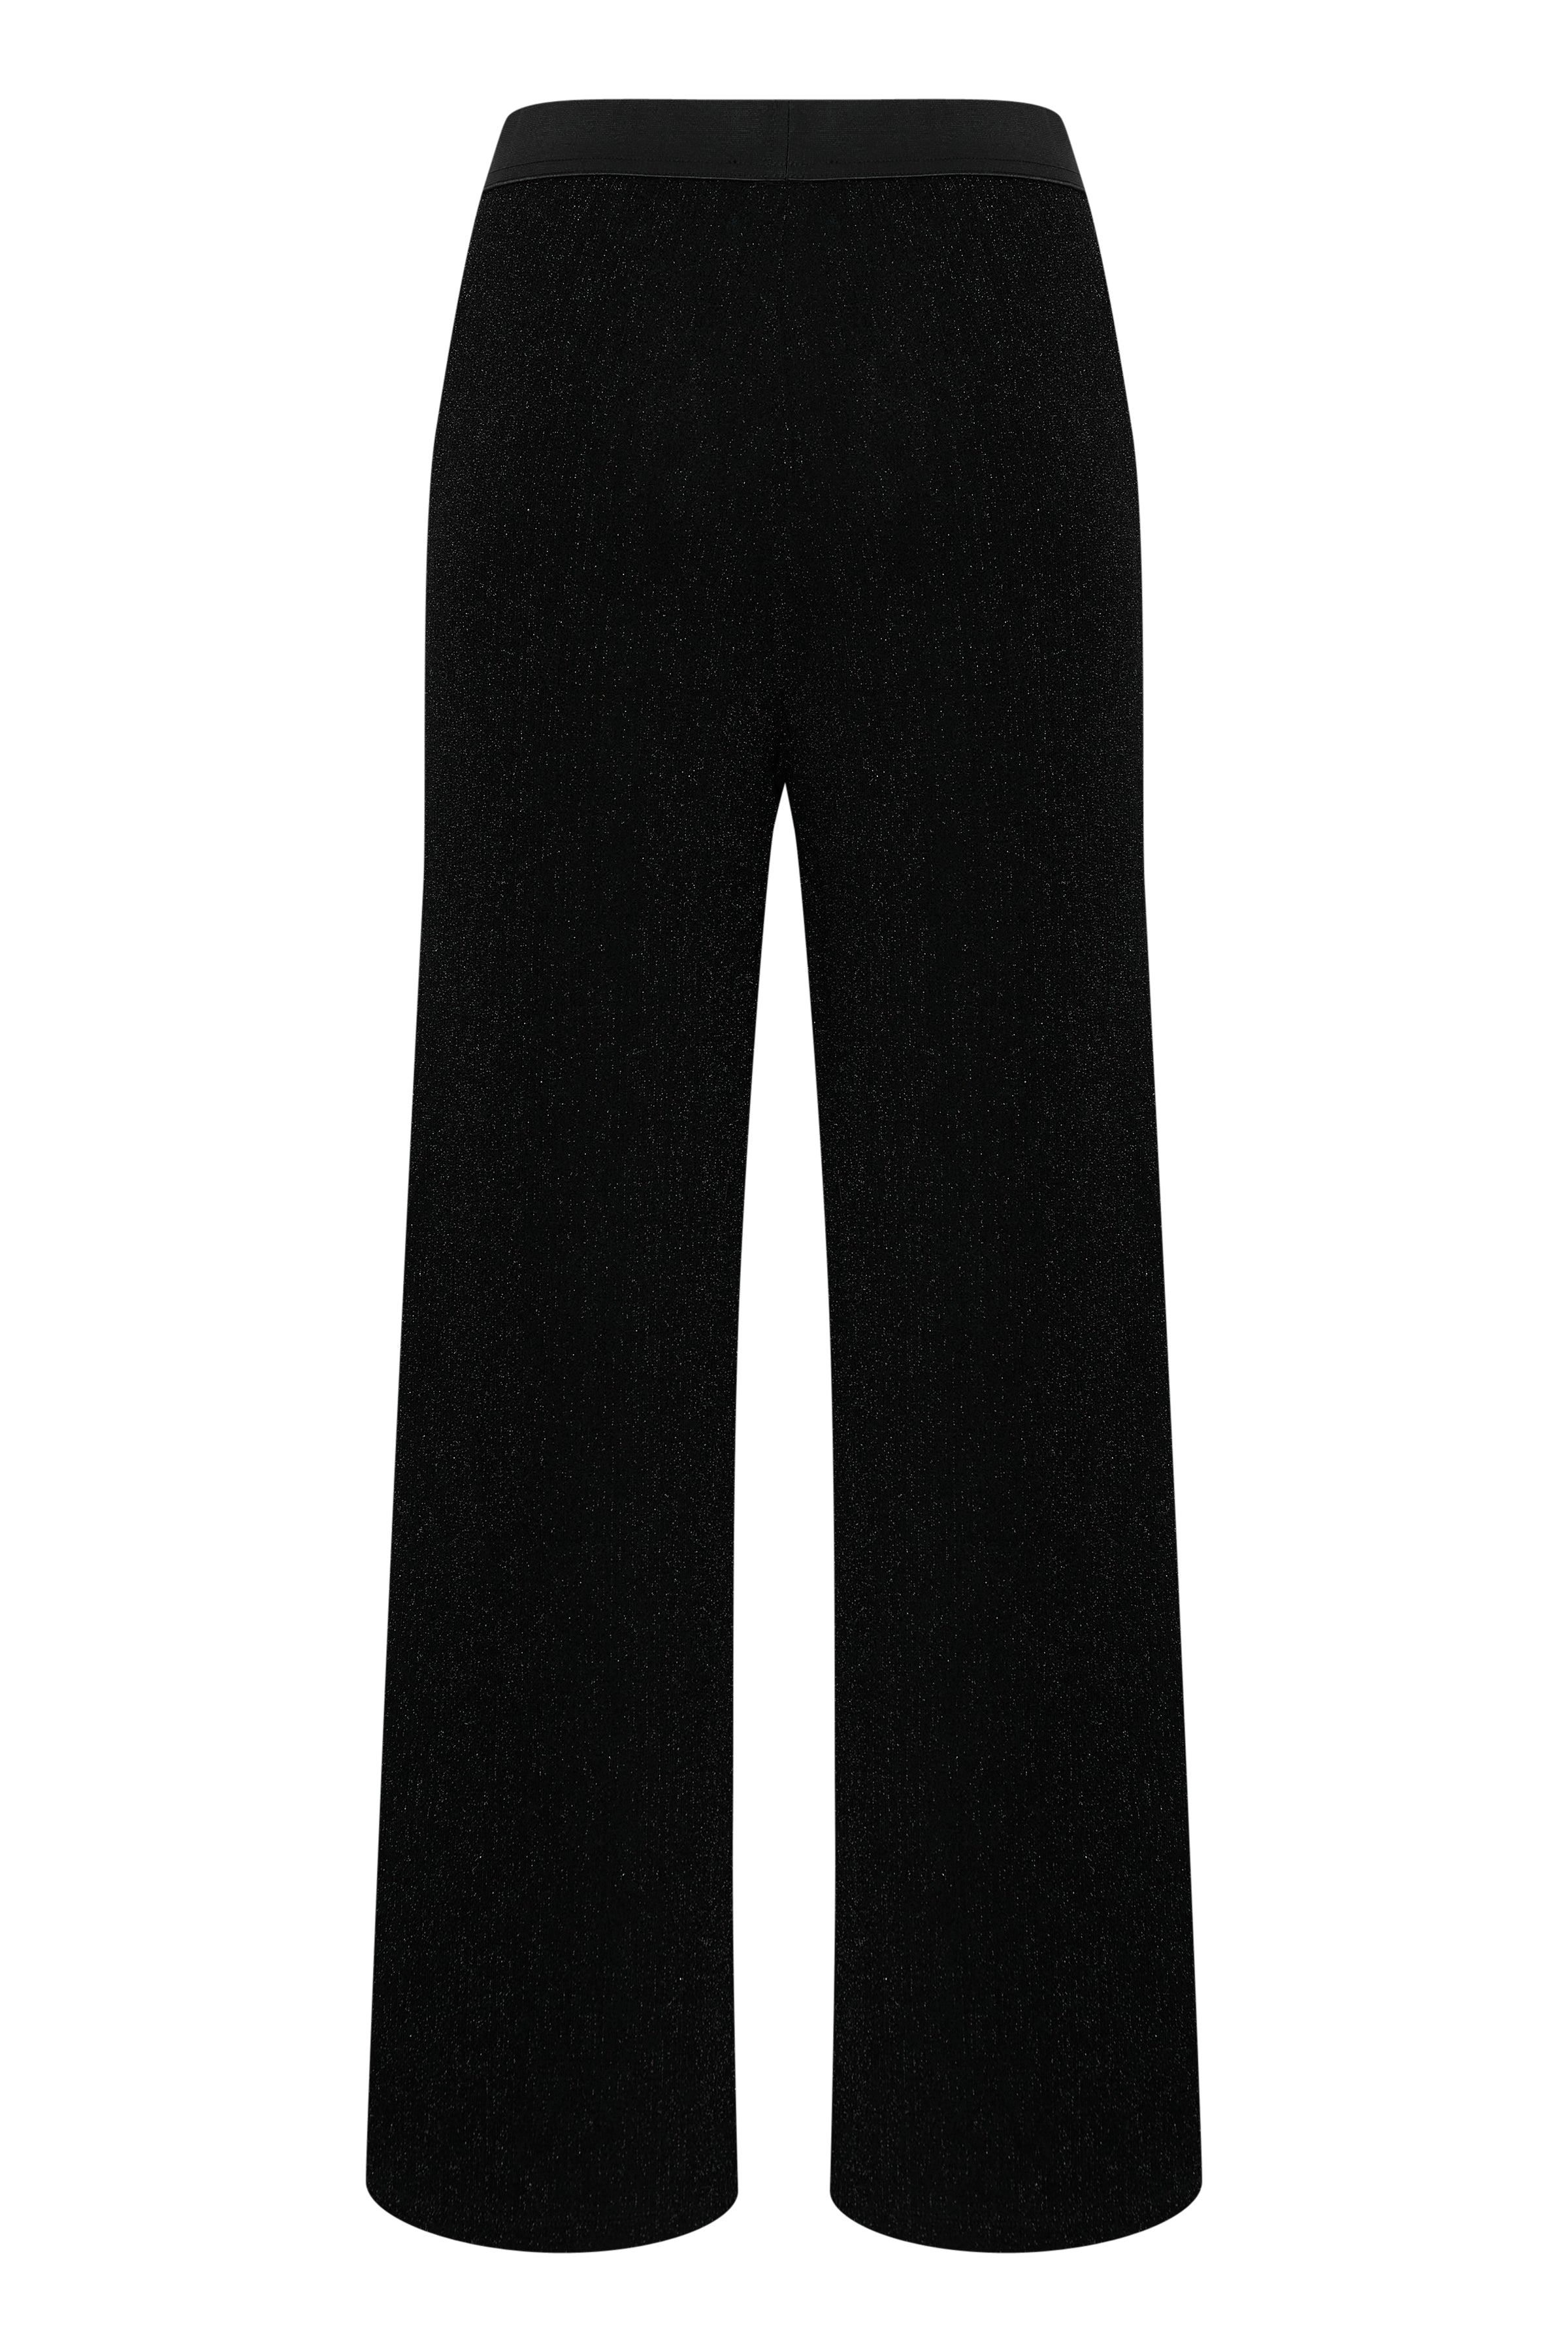 Ihnelly Trousers - Black Sparkle